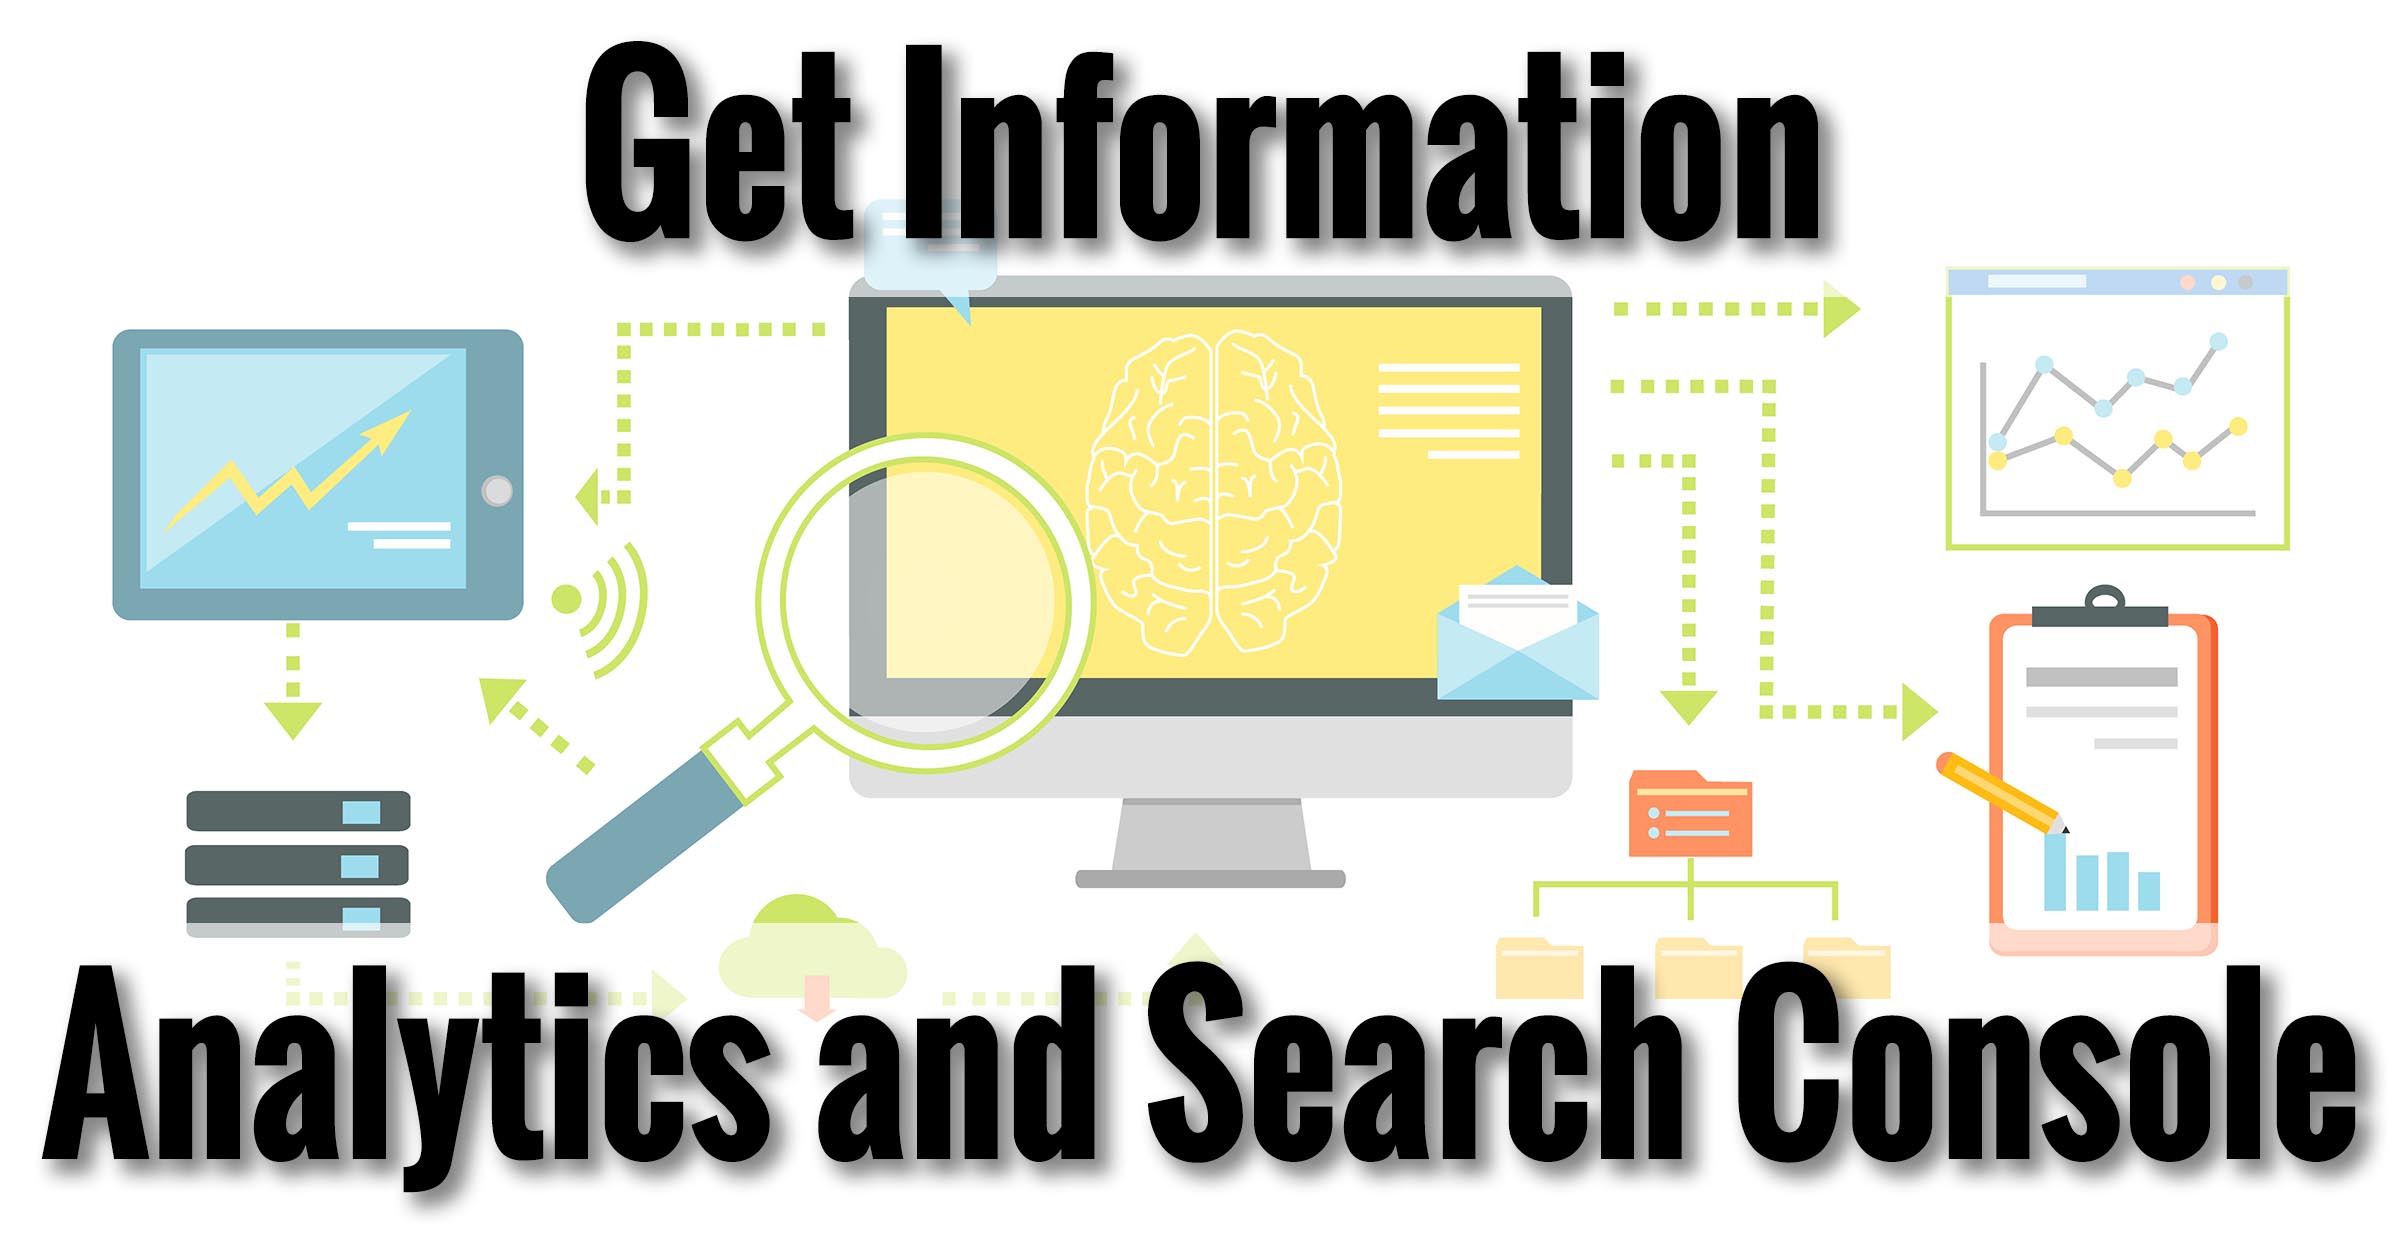 Get Information - Analytics and Search Console